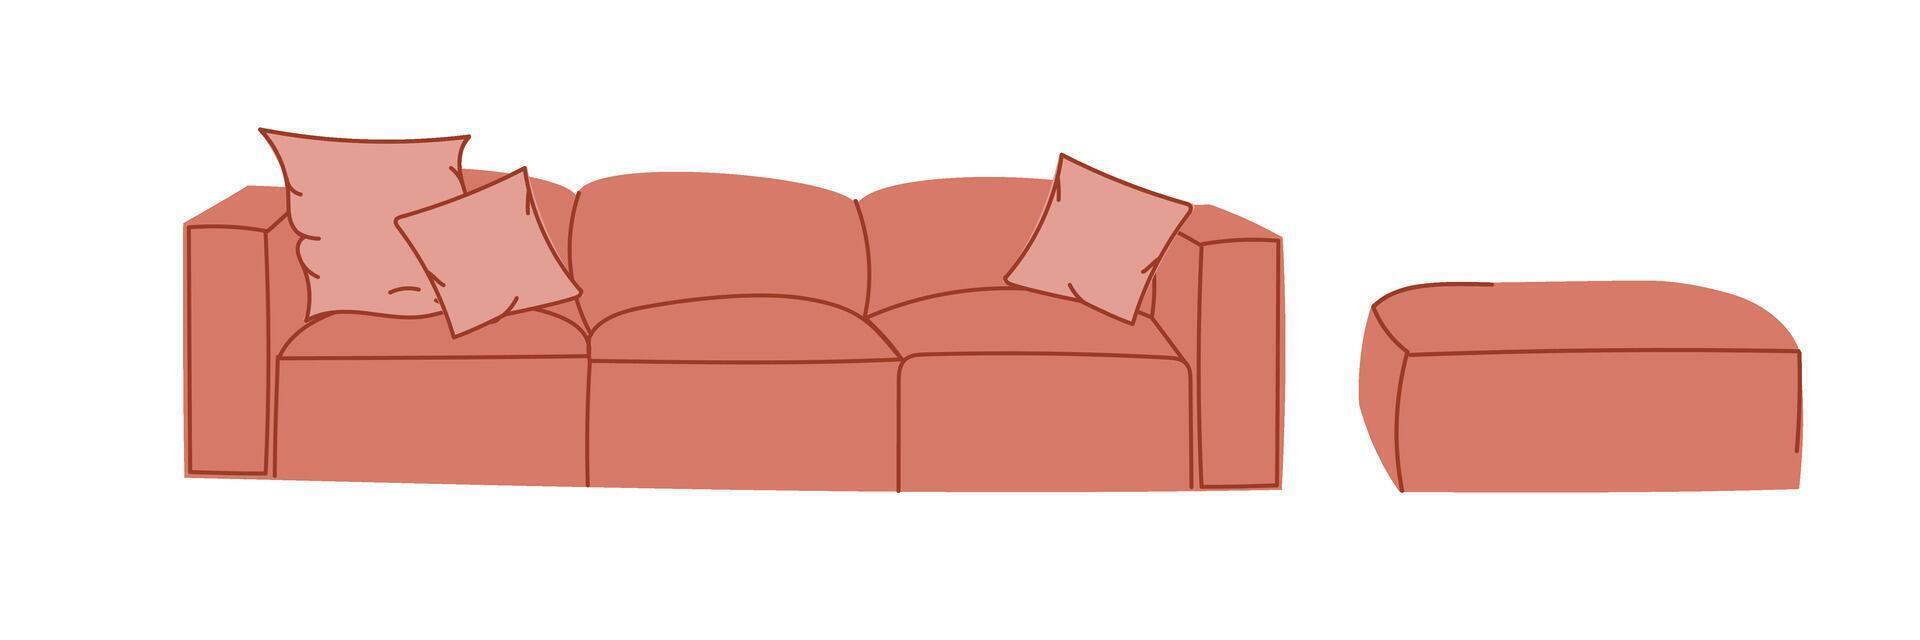 Fashionable pink sofa with retro style pillows. A modern collection of upholstered furniture. Flat illustration vector